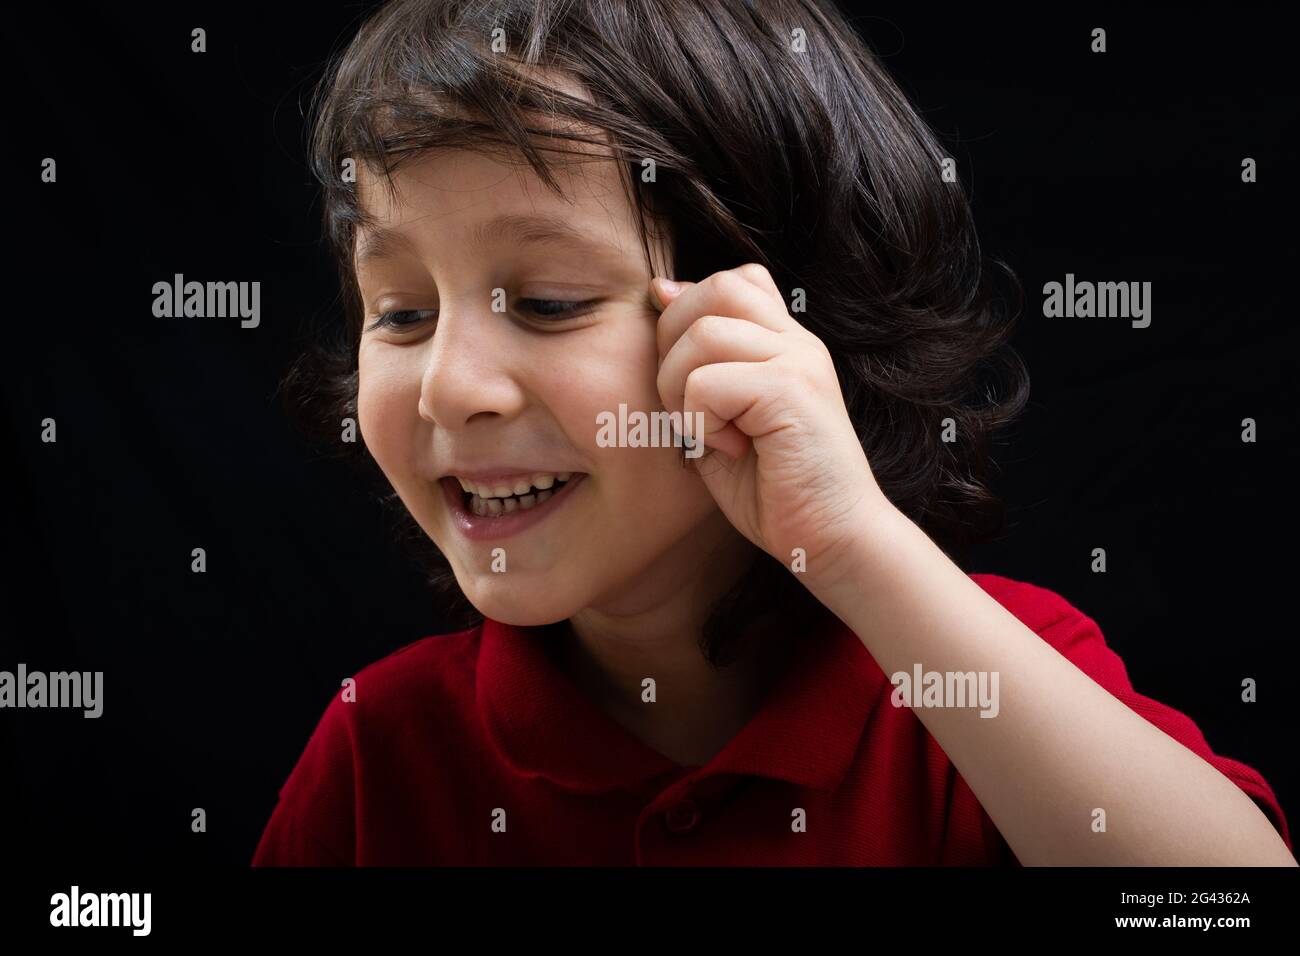 Portrait of a cute happy smiling boy in good mood Stock Photo